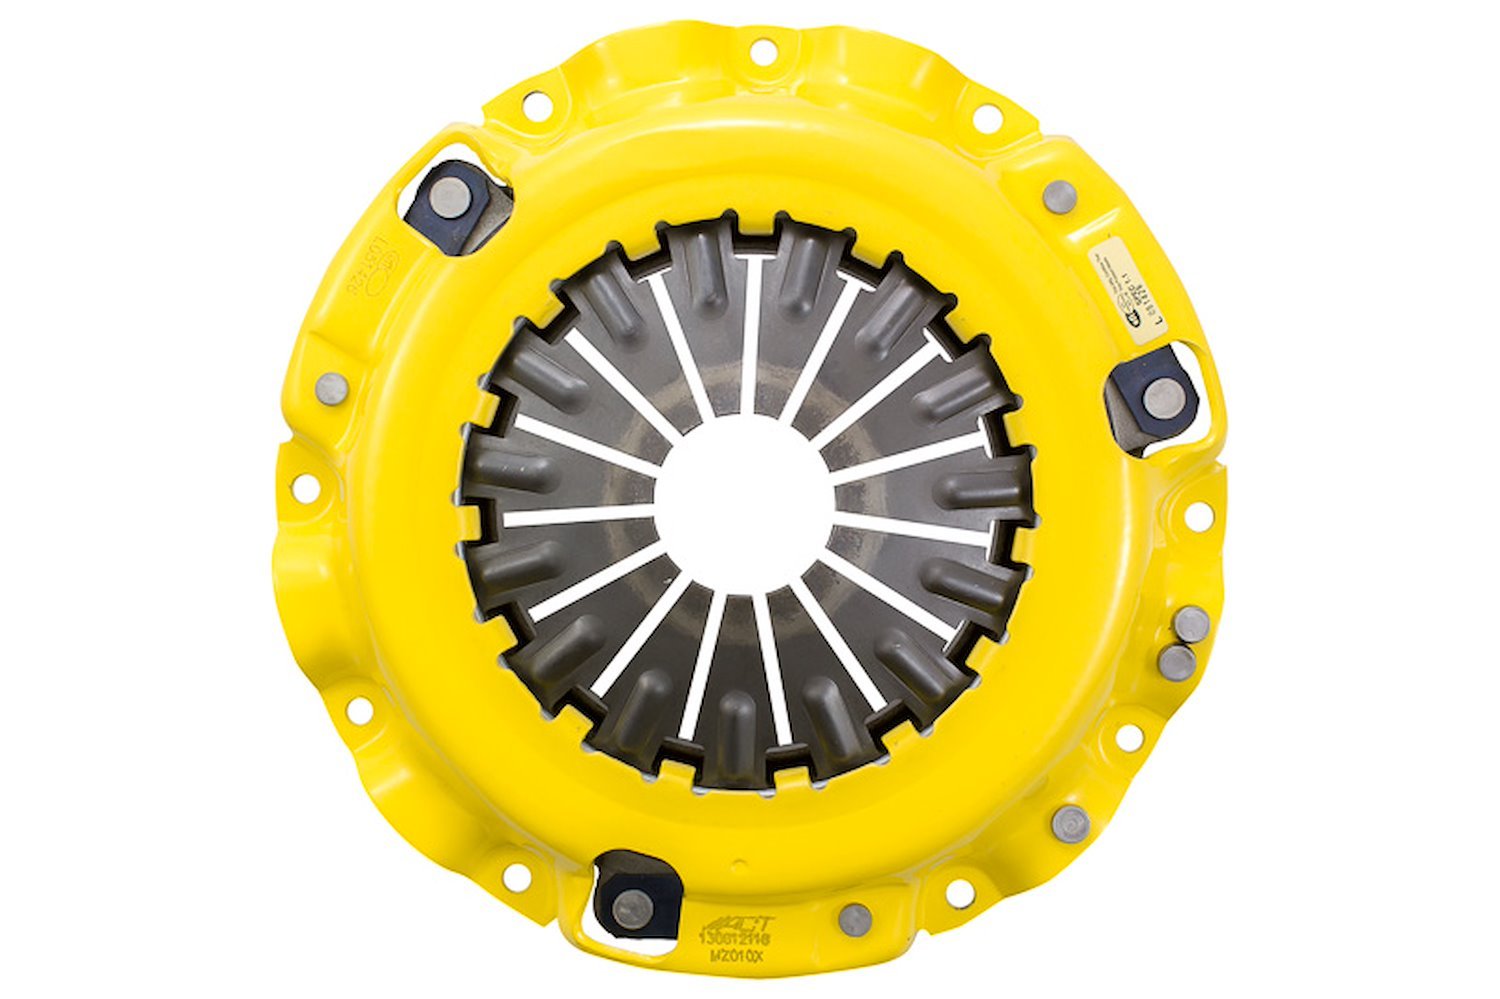 MaXX Xtreme Transmission Clutch Pressure Plate Fits Select Multiple Makes/Models